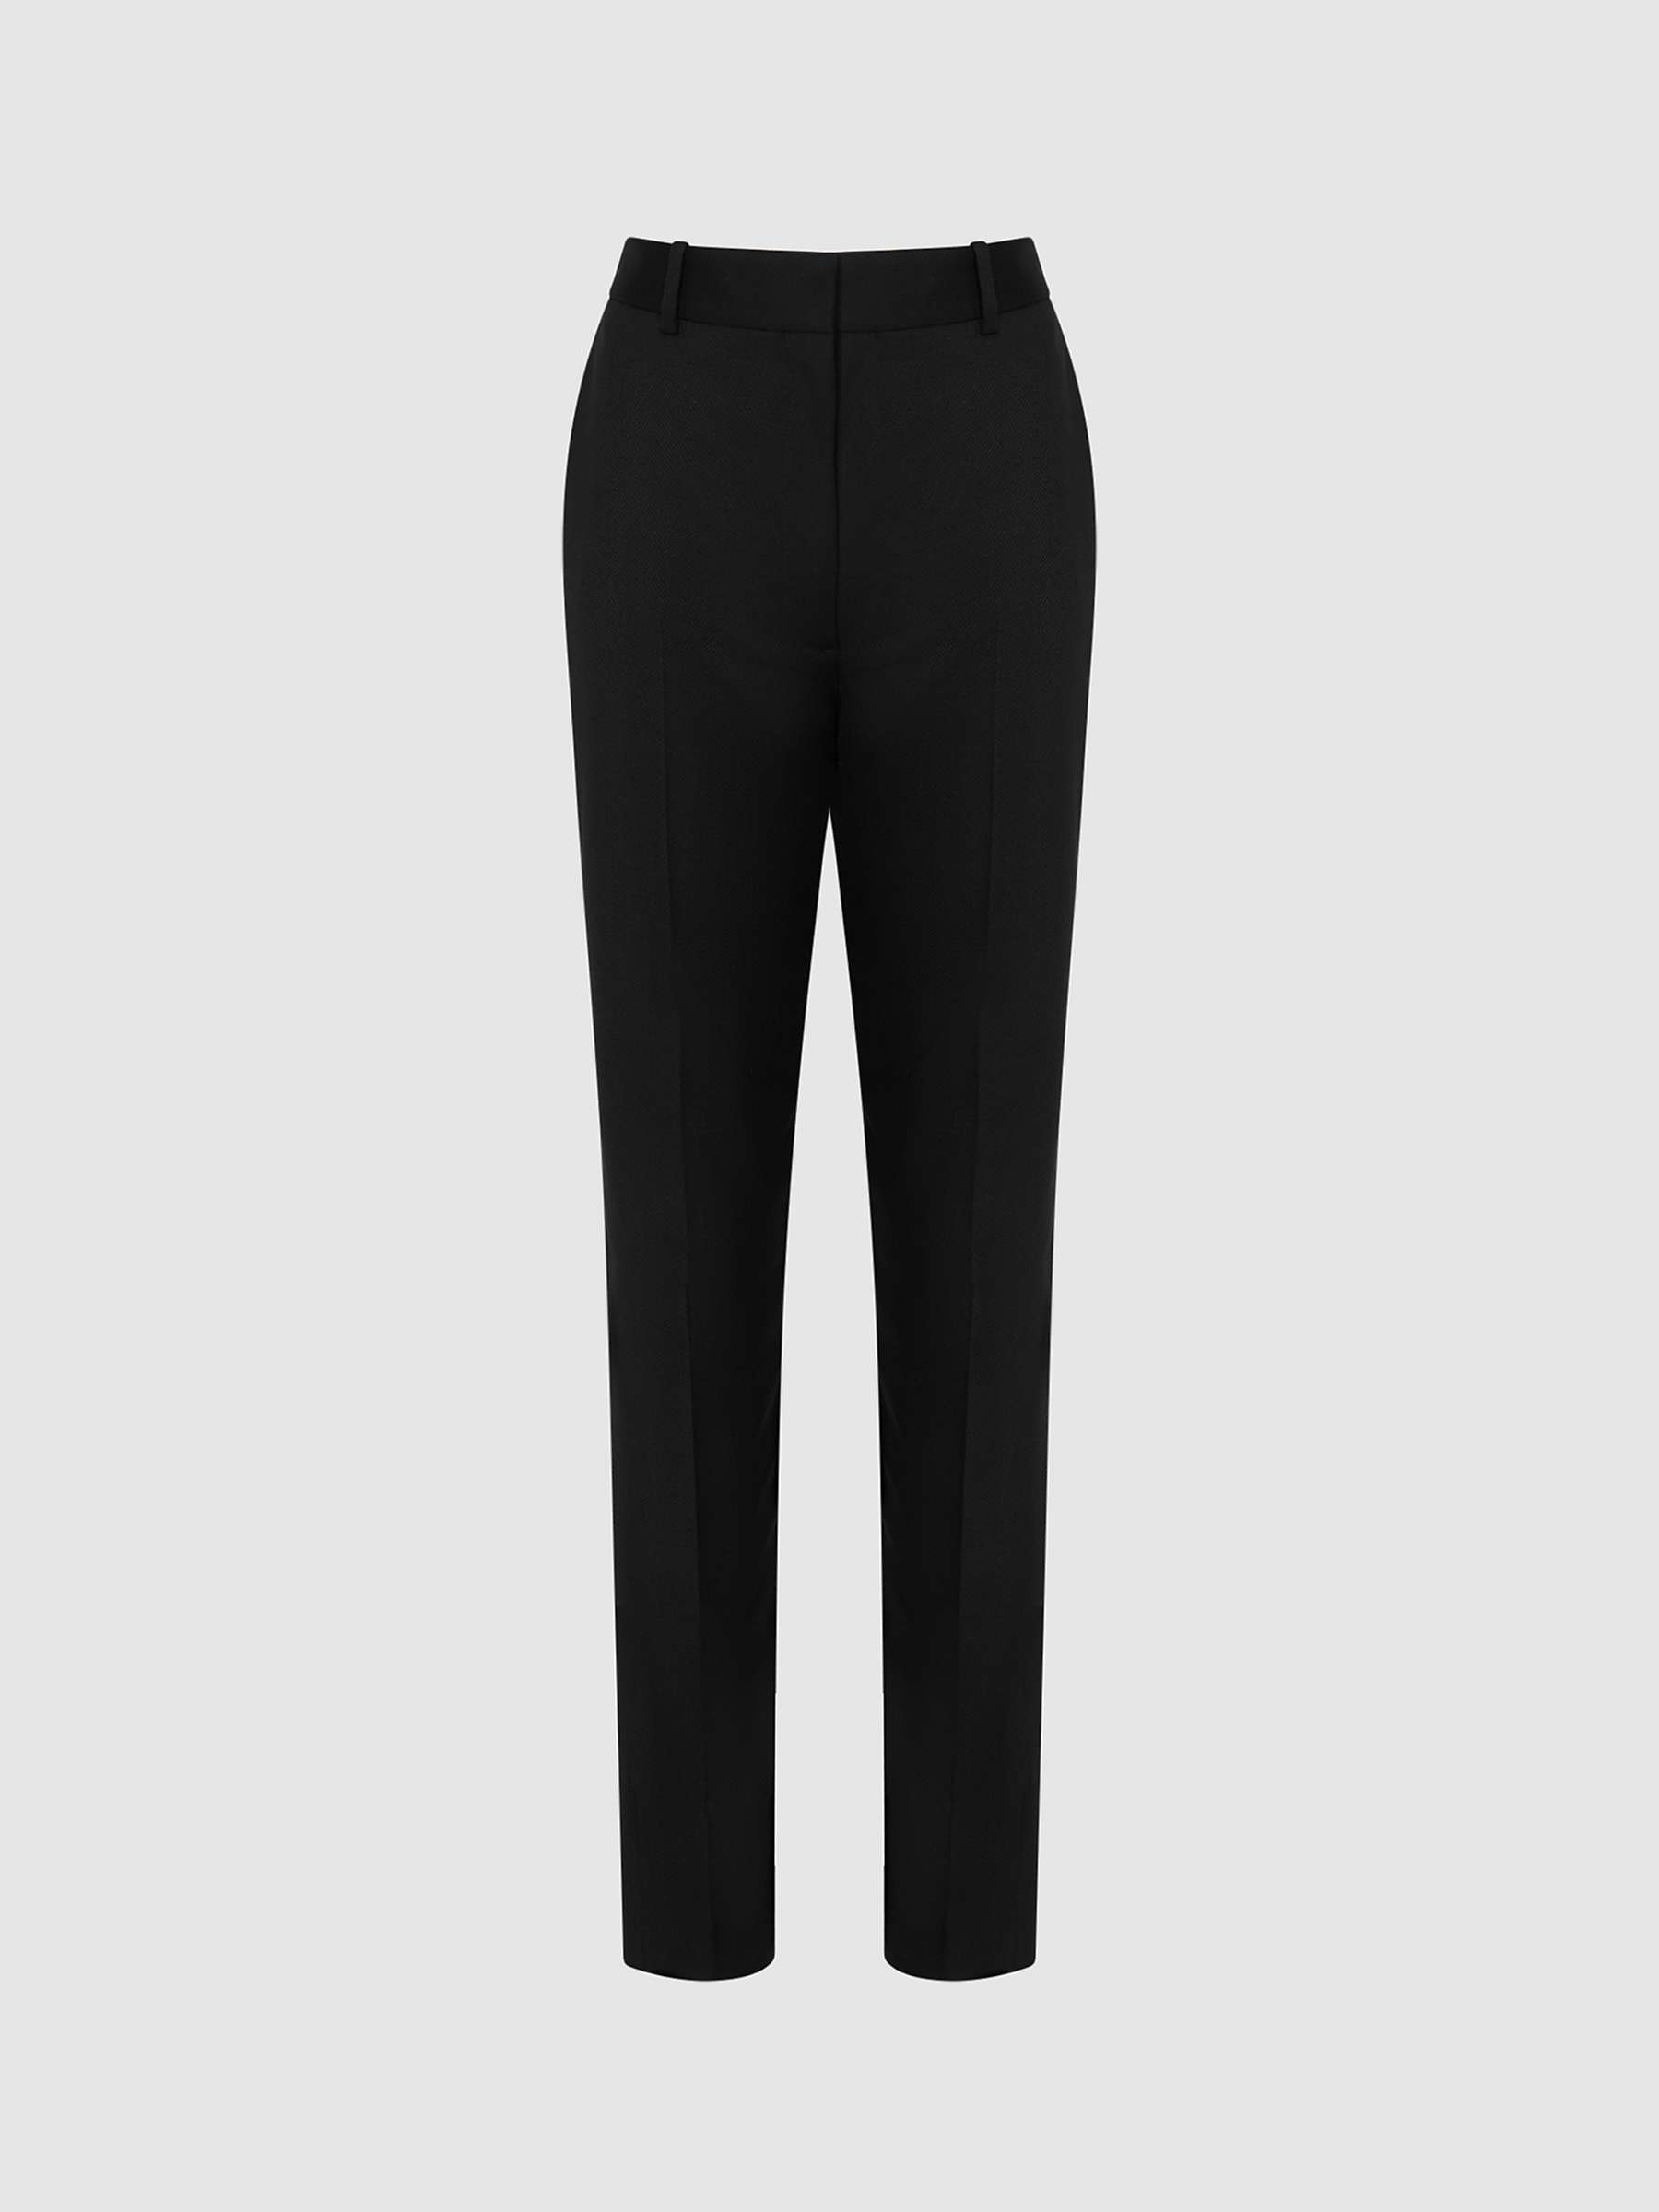 Buy Reiss Haisley Wool Blend Tailored Trousers Online at johnlewis.com